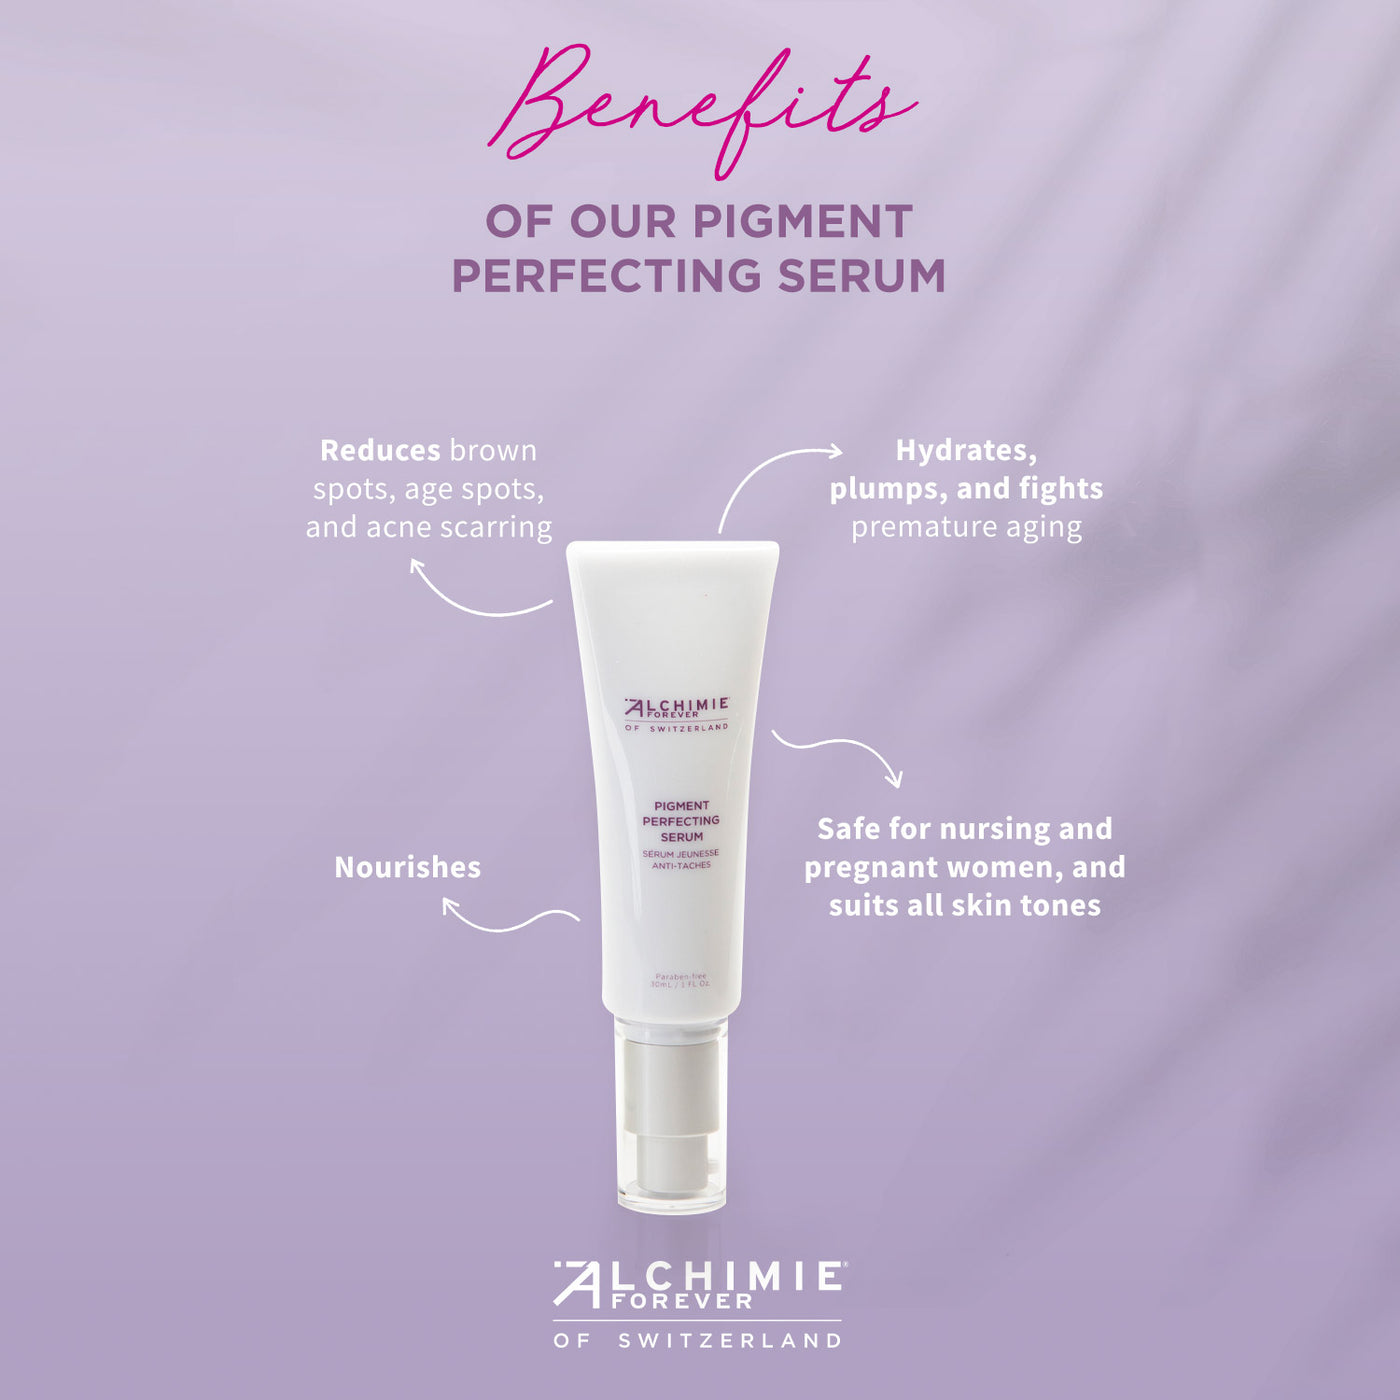 Pigment Perfecting Serum Benefits.  Reduces dark spots, age spots and acne scarring.  Hydrates, plumps and nourishes the skin while fighting signs of premature aging.  Pregnancy safe and suits all skin tones.